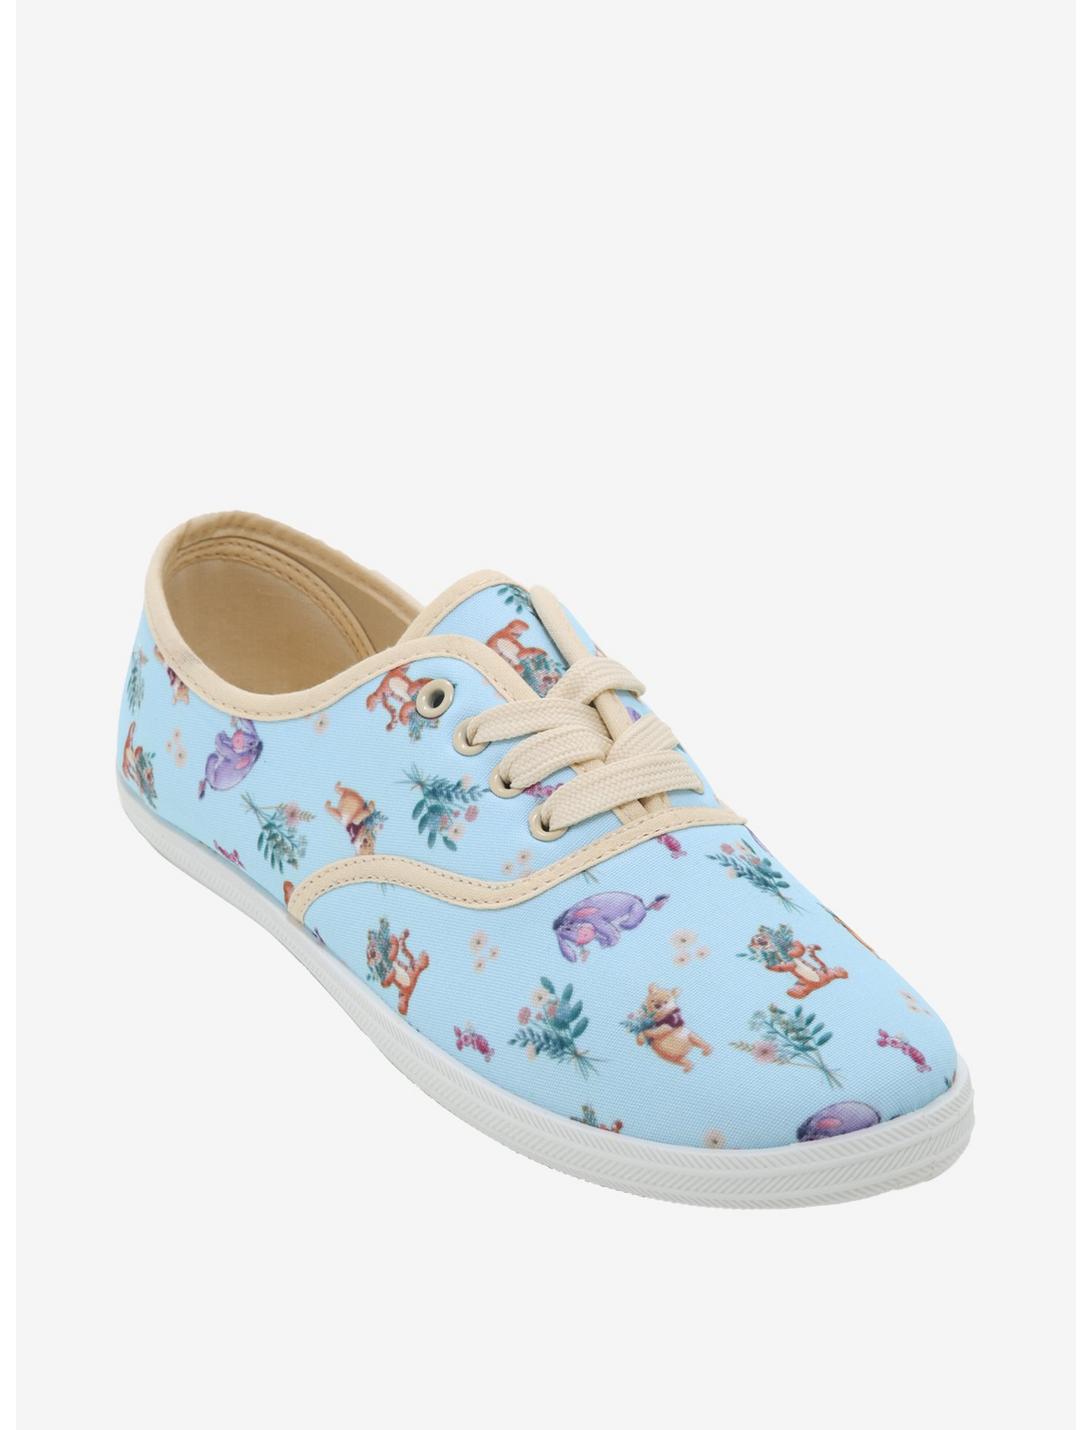 Disney Winnie The Pooh & Friends Lace-Up Sneakers, MULTI, hi-res